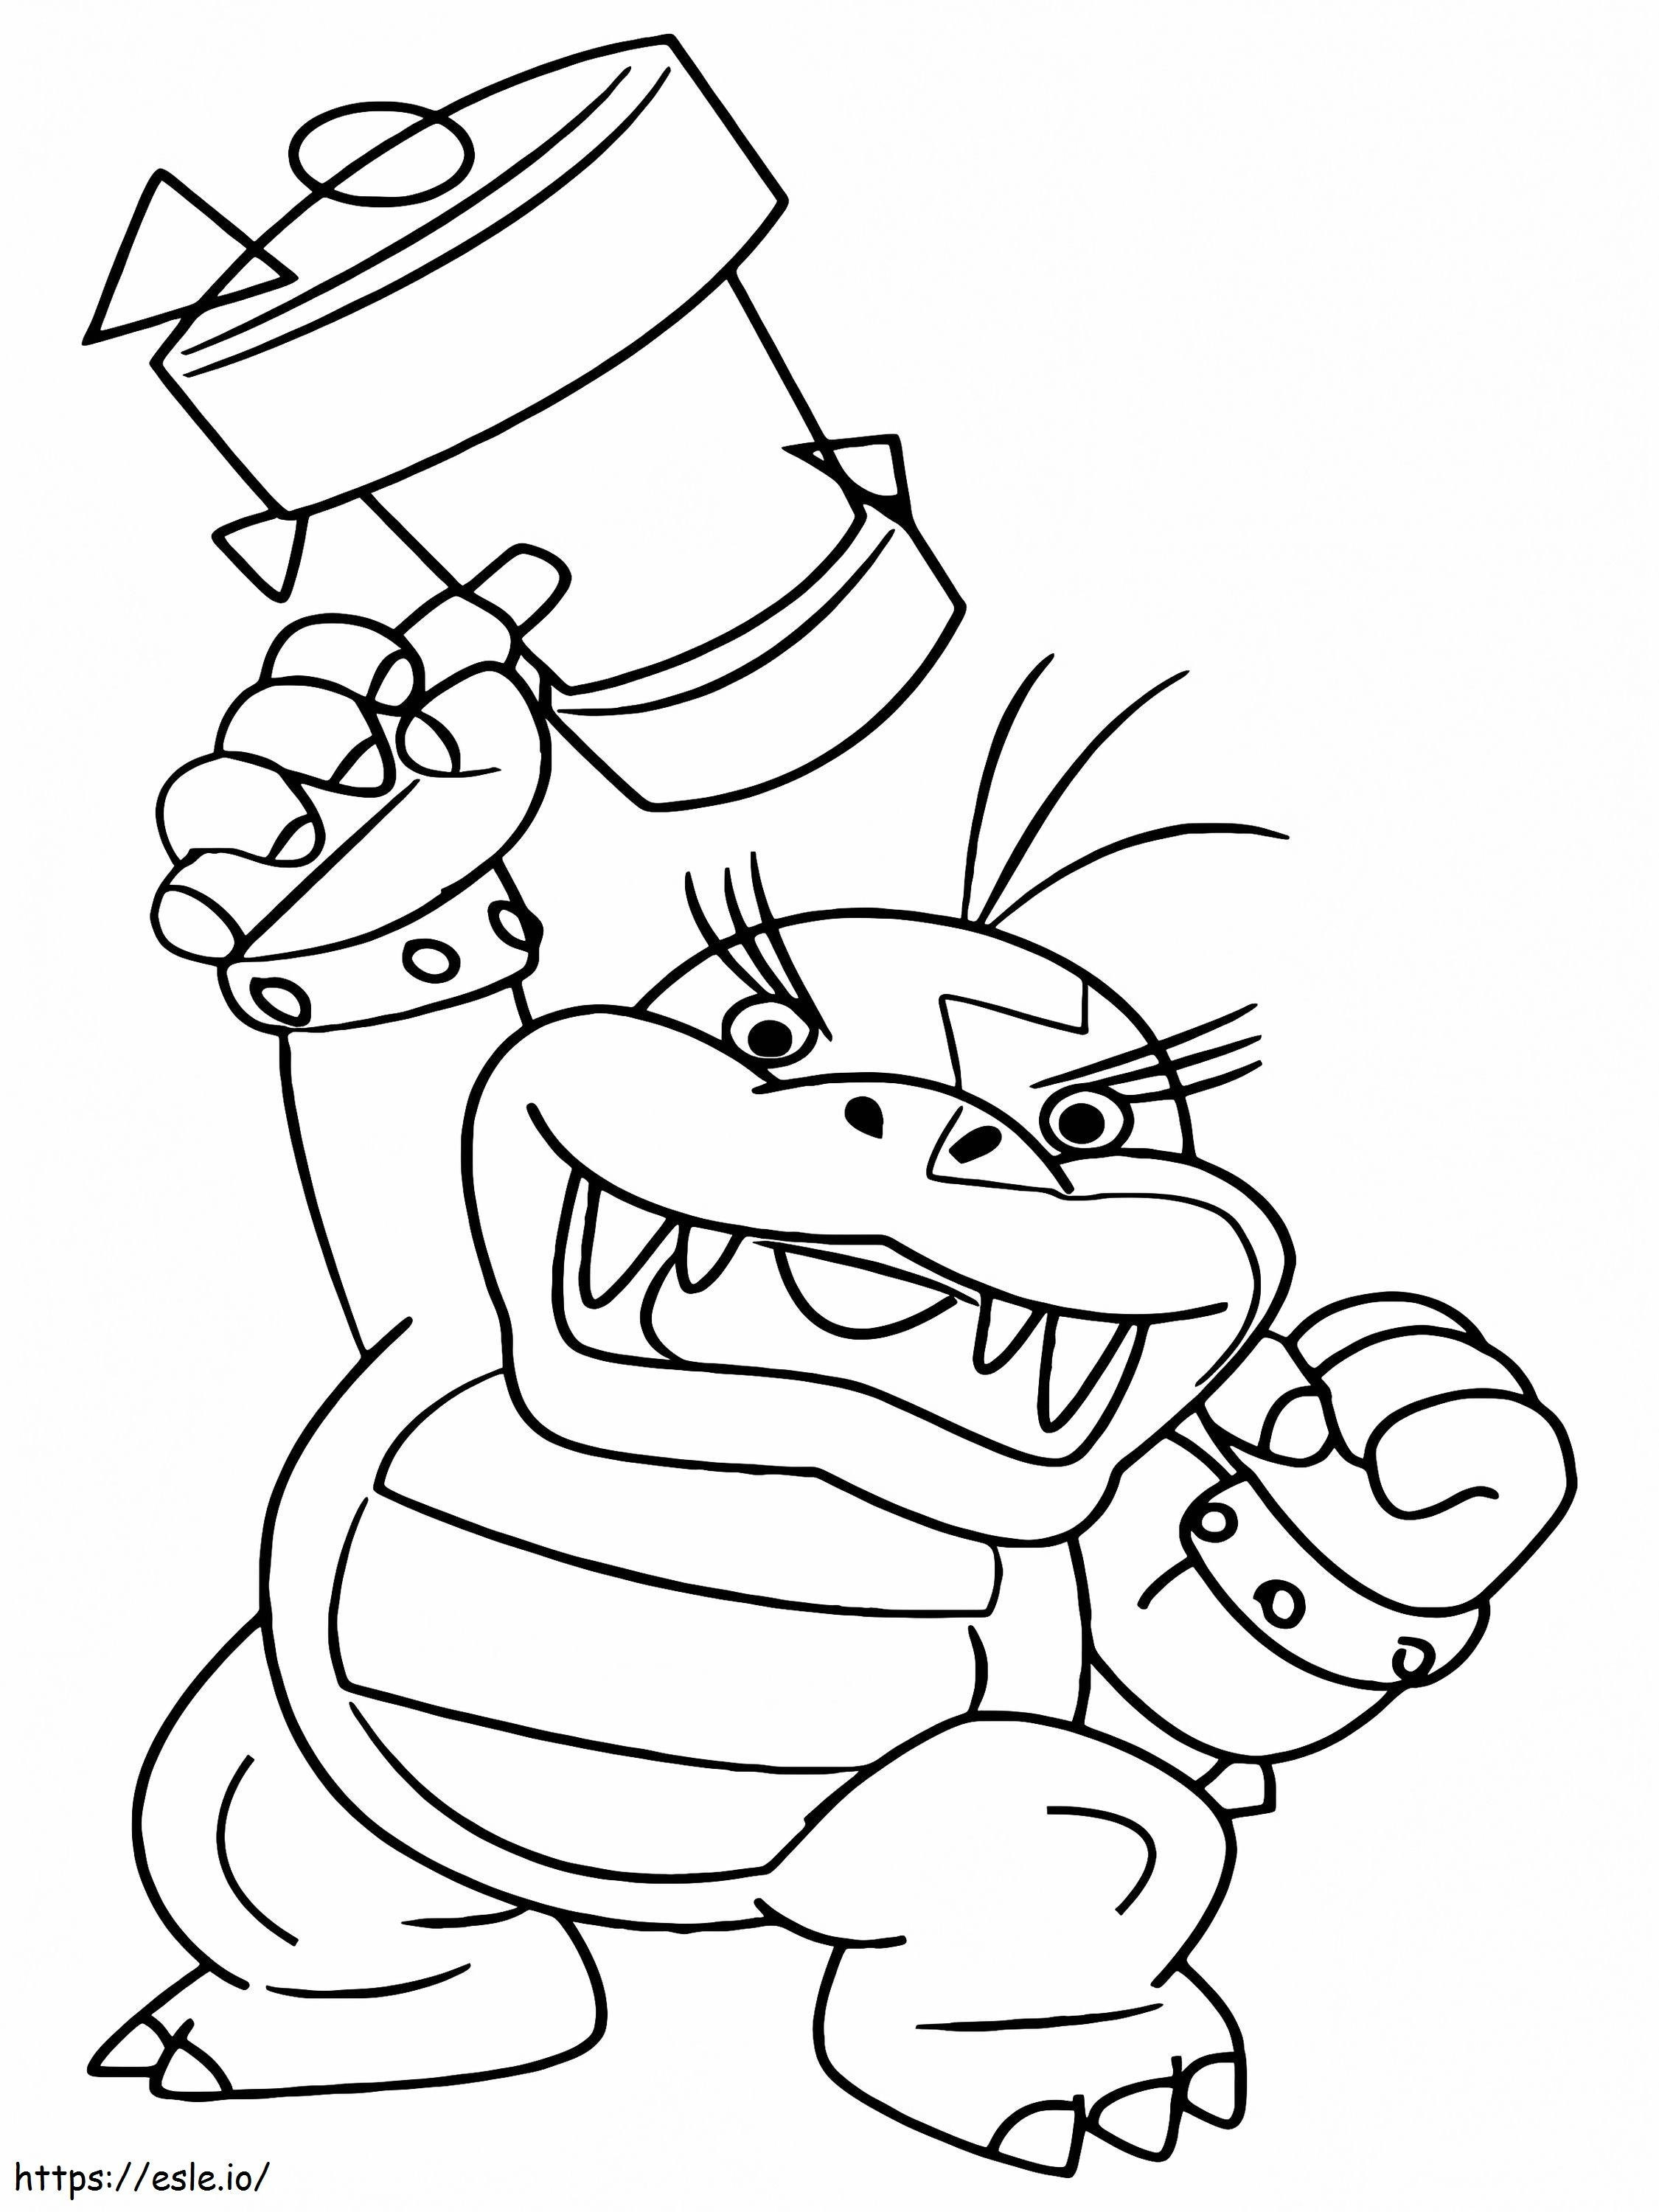 Strong Baby Bowser coloring page